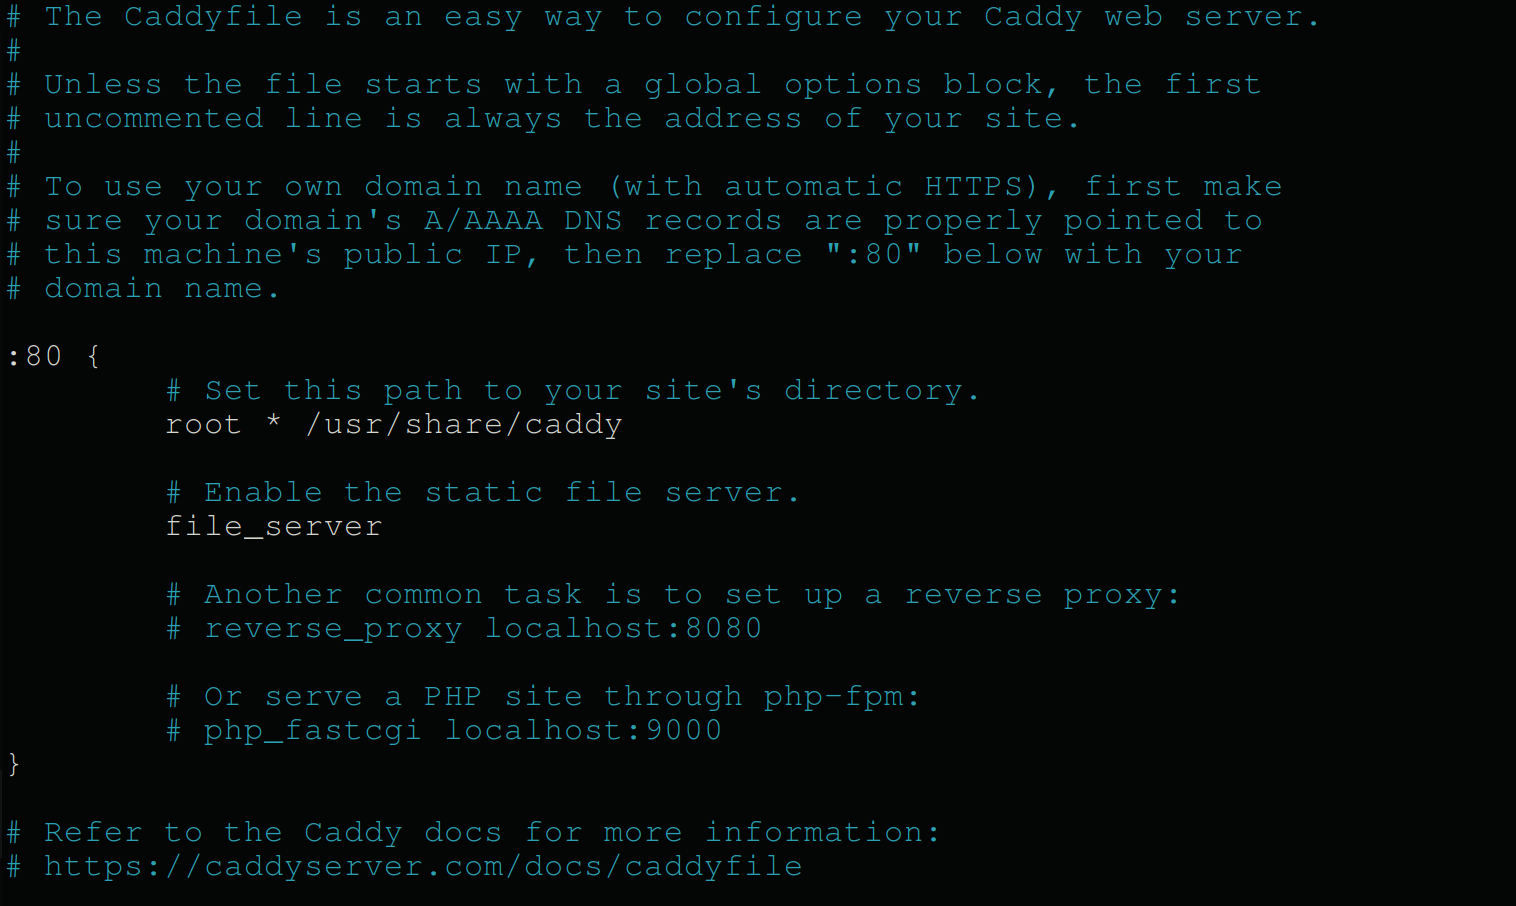 Opening the Caddyfile 